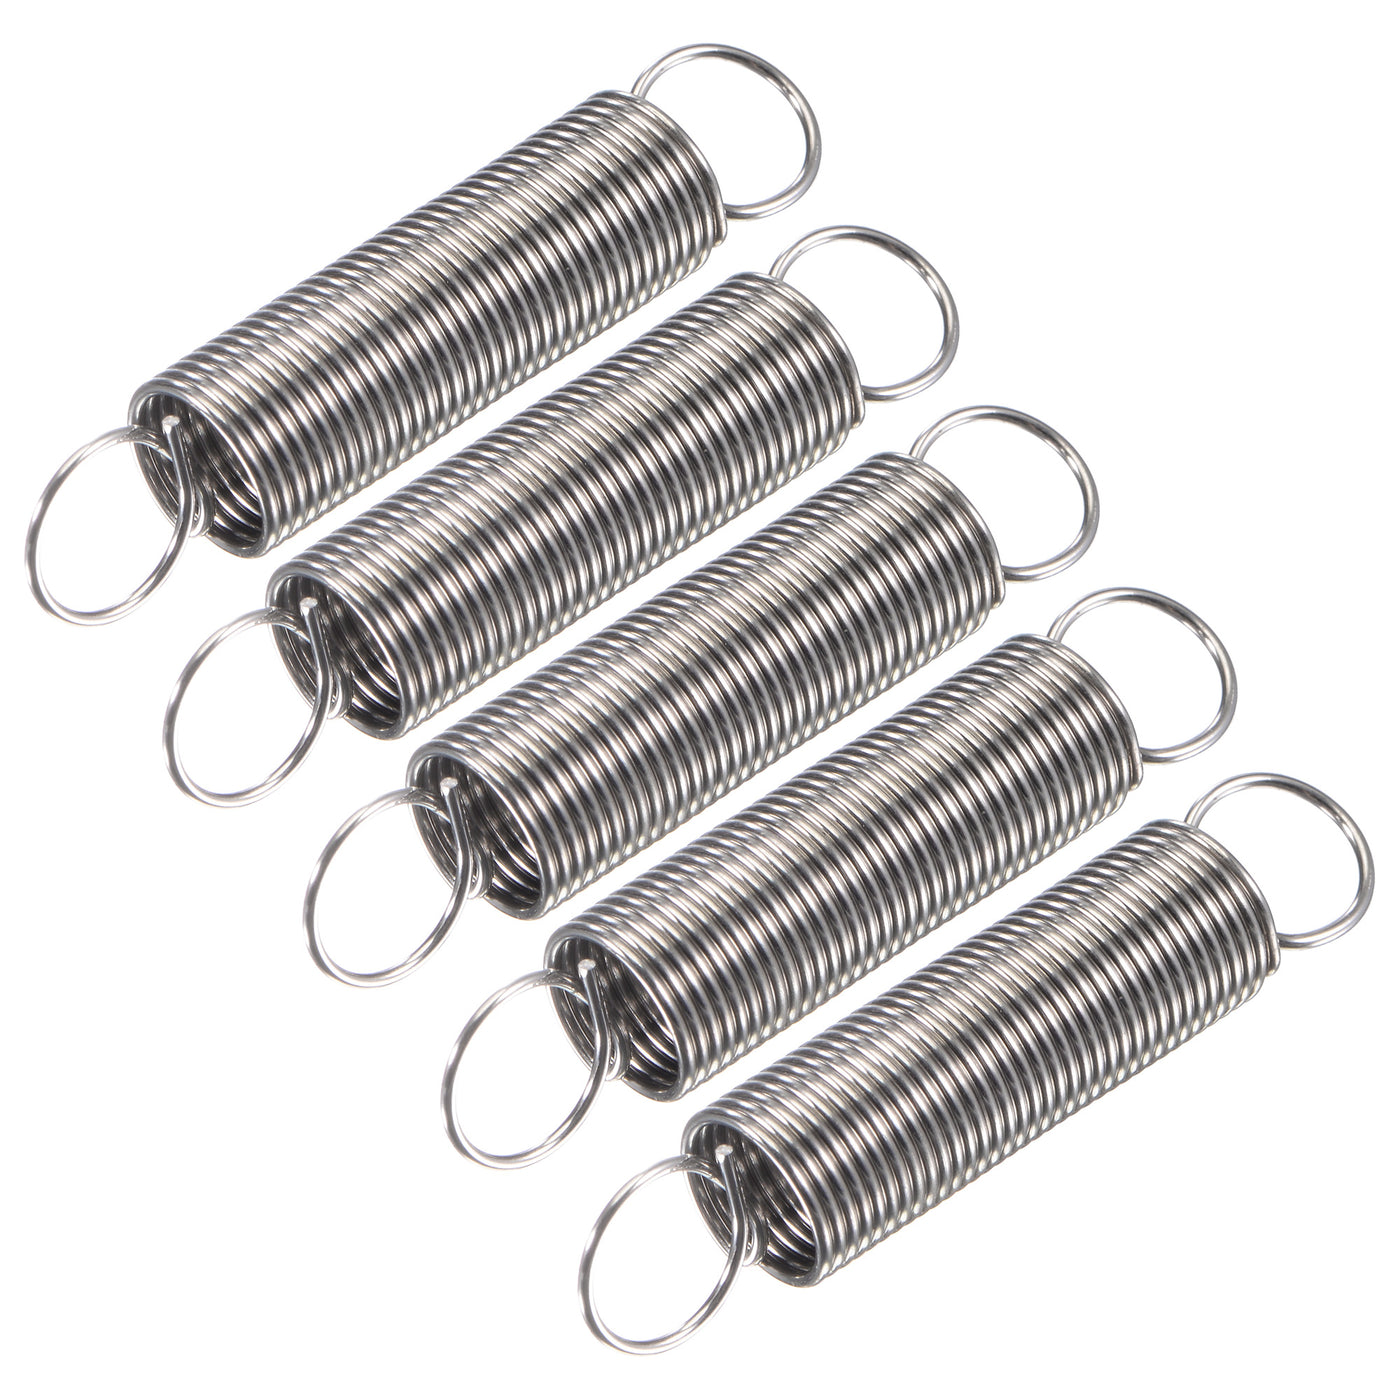 Uxcell Uxcell 1mmx12mmx70mm Extended Compression Spring,2.9Lbs Load Capacity,Silver,5pcs